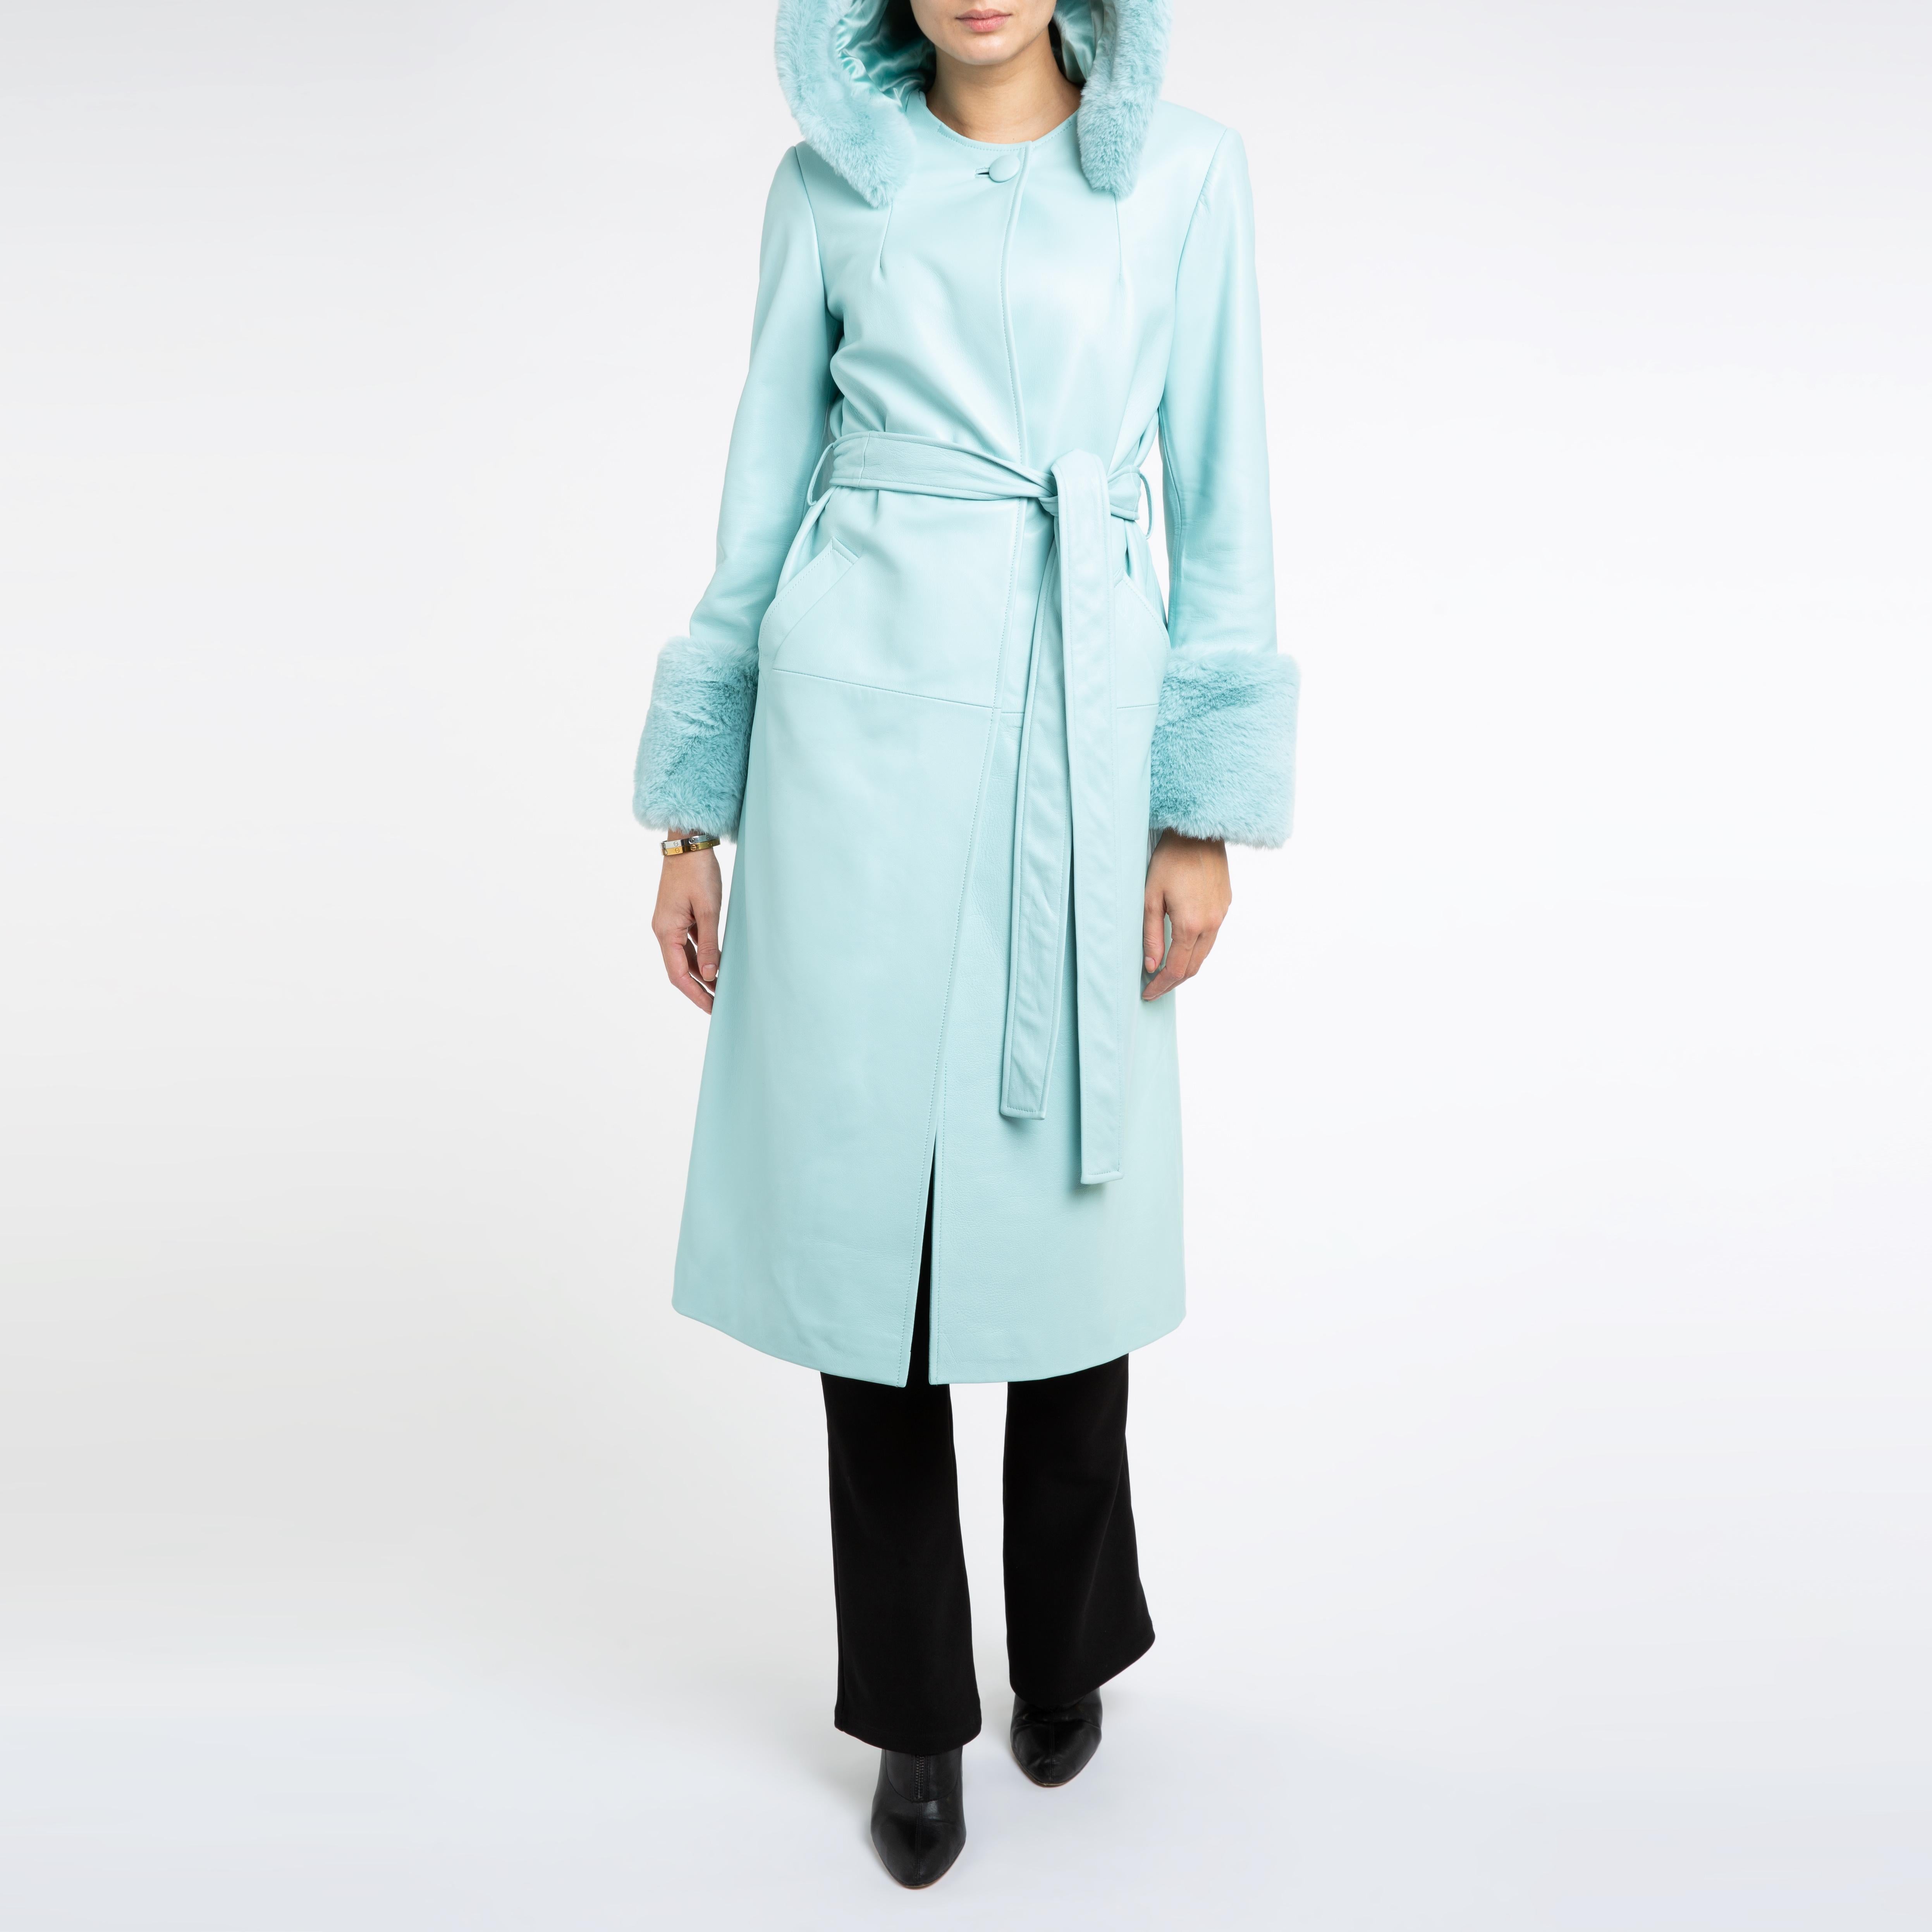 Verheyen London Hooded Leather Trench Coat in Blue with Faux Fur - Size uk 16 1